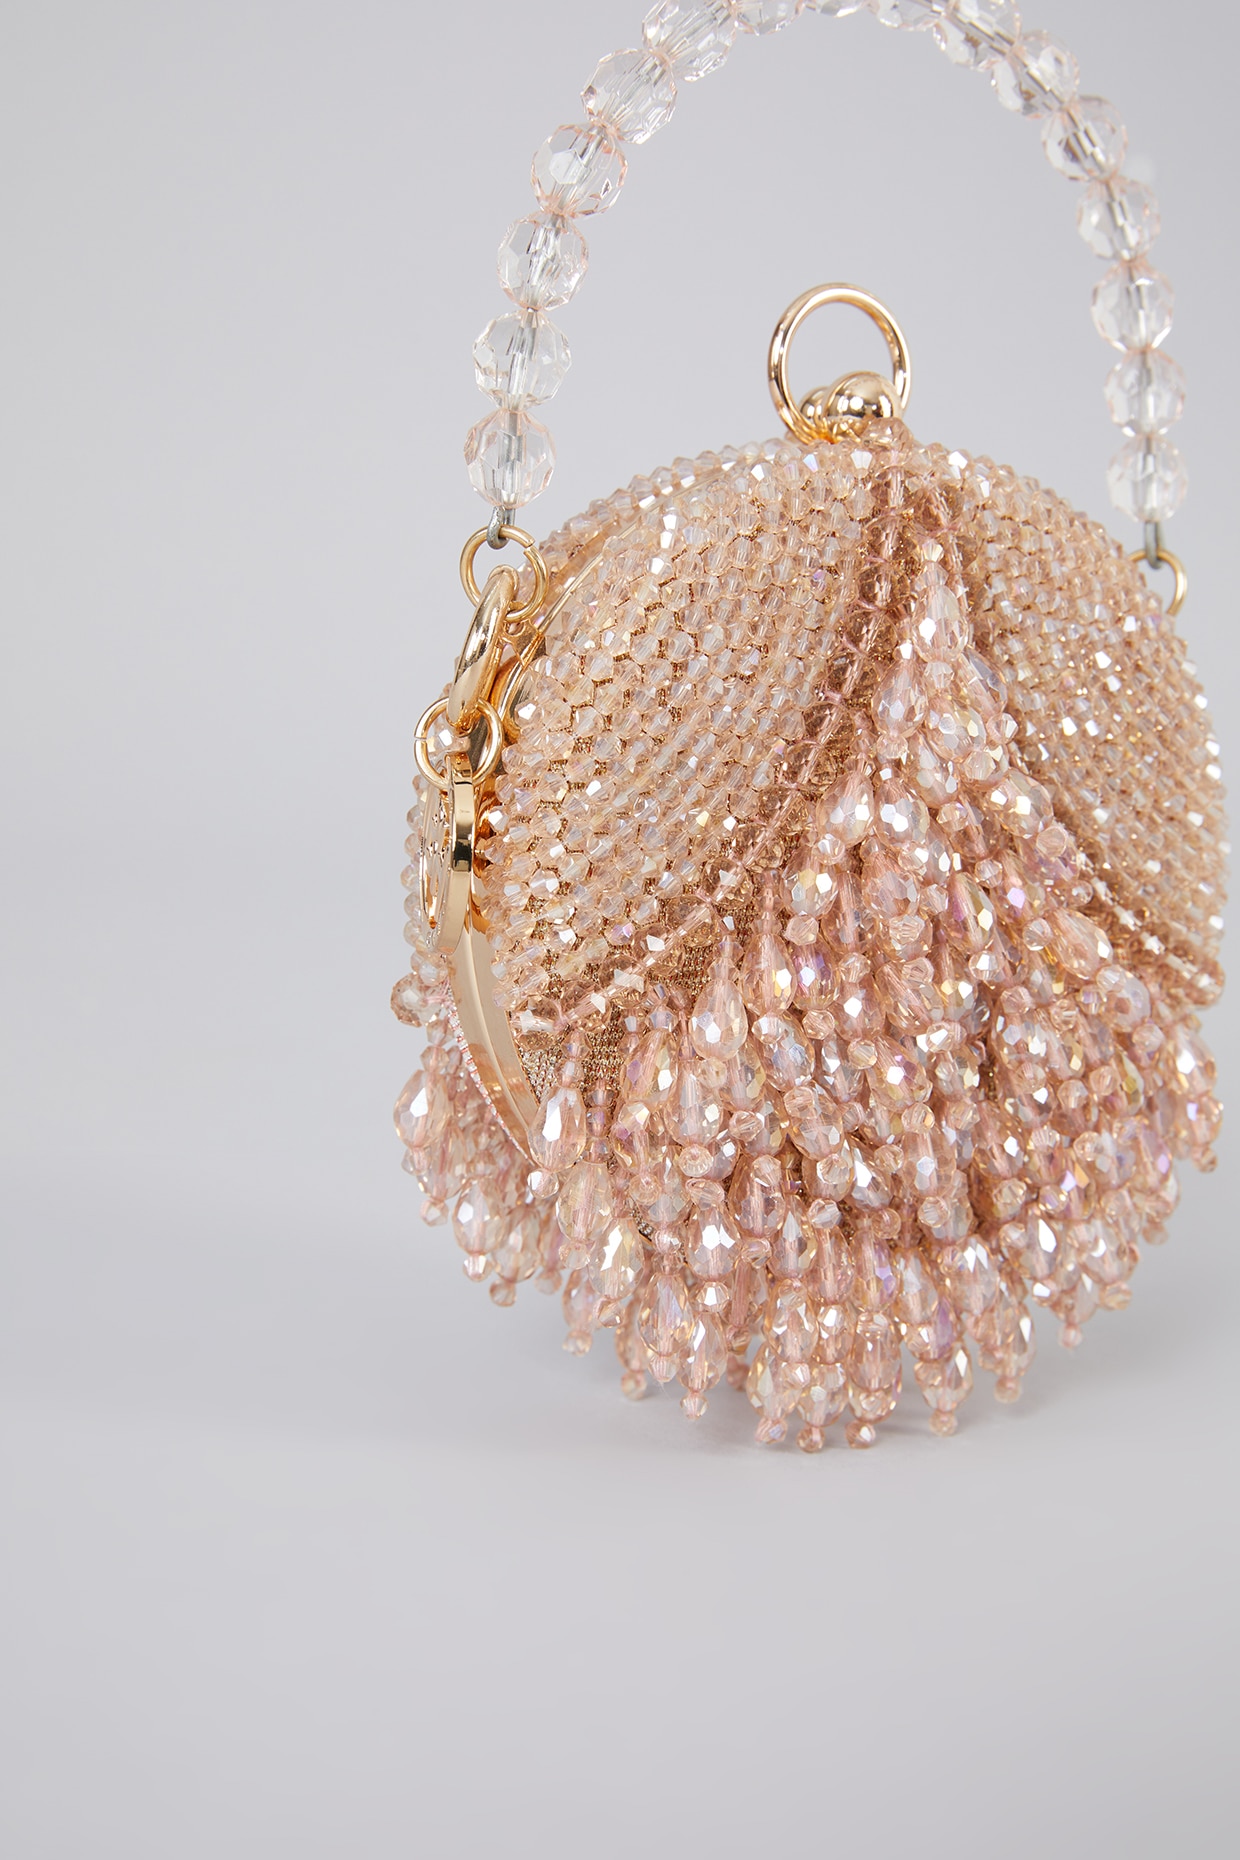 2021 HBP Basketball Basketball Bag Round Ball Gold Clutch Purse With  Rhinestone Accents For Womens Evening Parties Pink/Black From Luxuryflash,  $49.52 | DHgate.Com